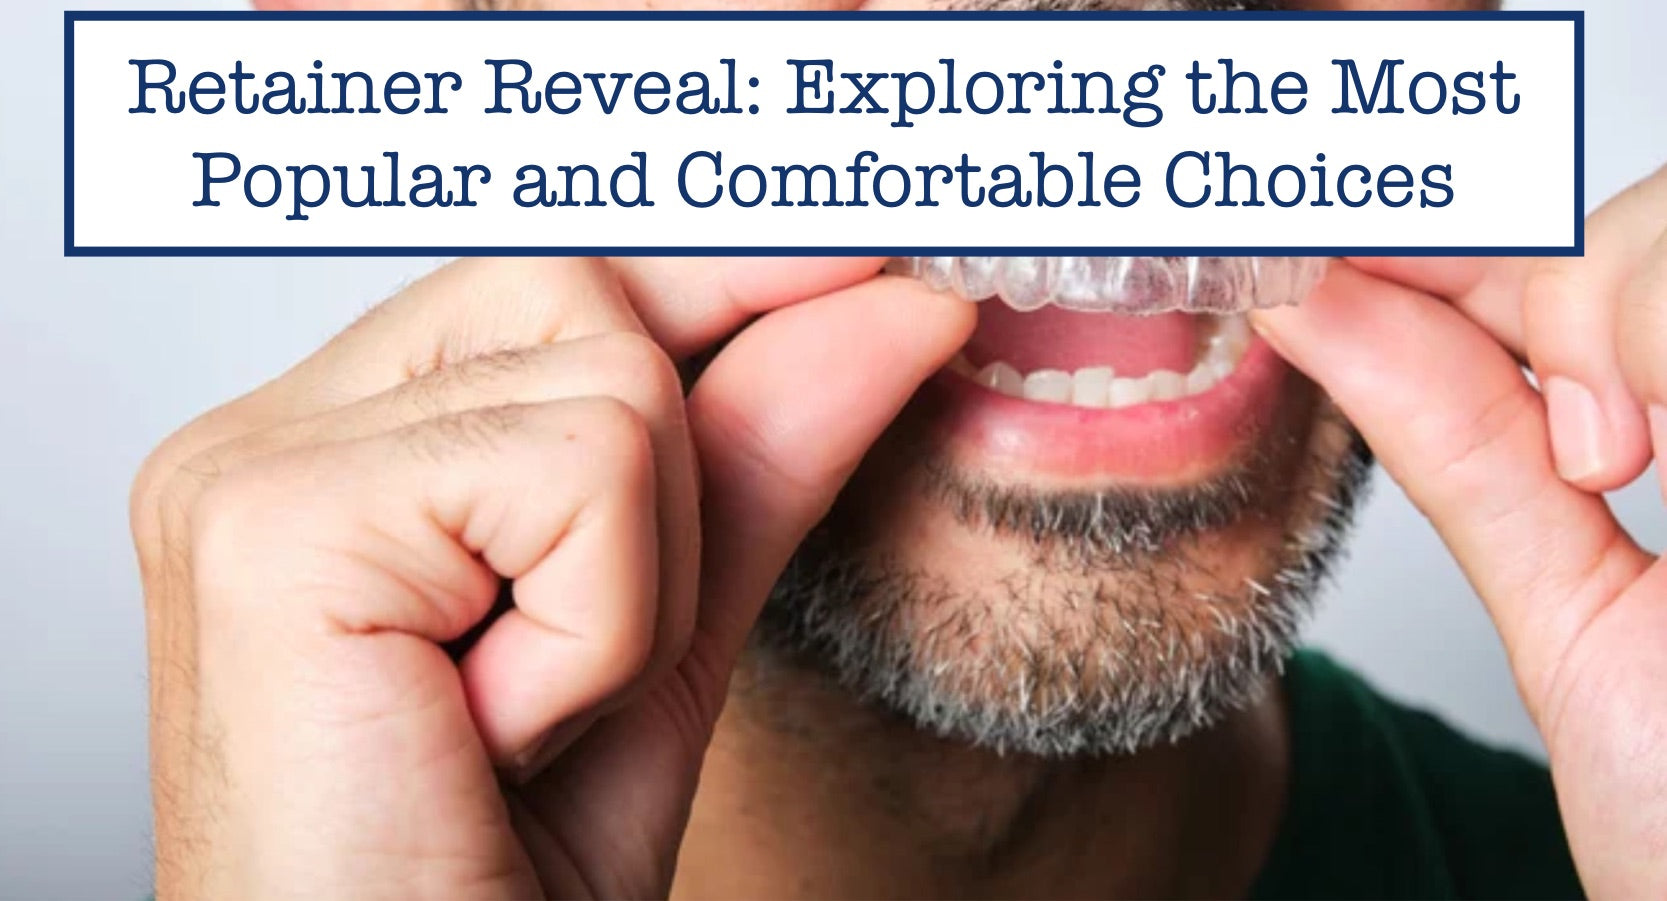 Retainer Reveal: Exploring the Most Popular and Comfortable Choices